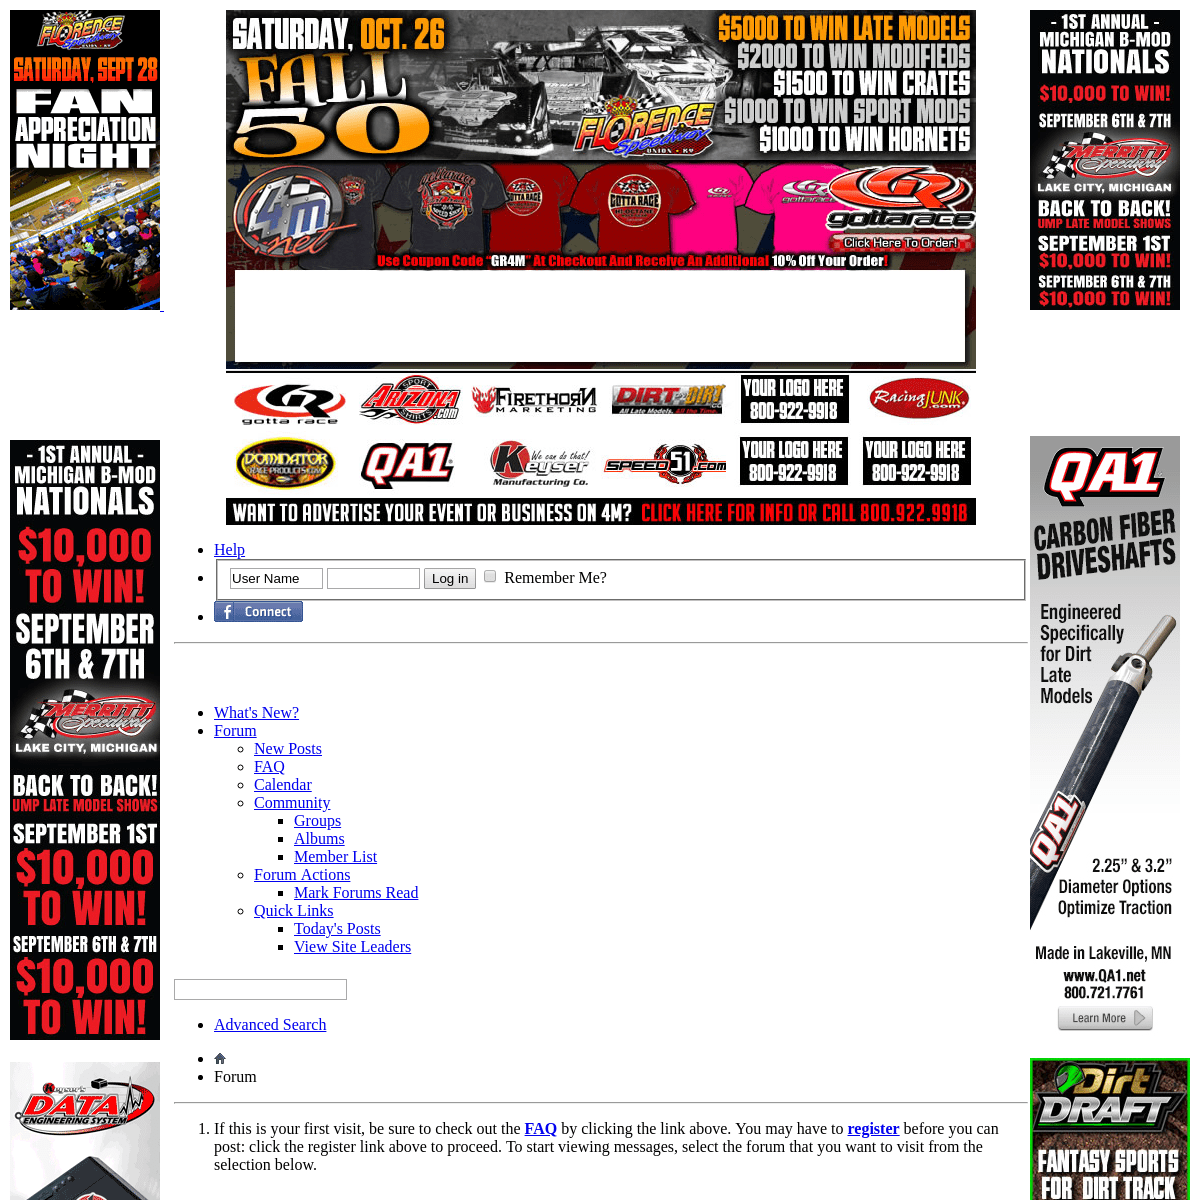 4m.net - The Most Opinionated Racing Message Board In The Universe